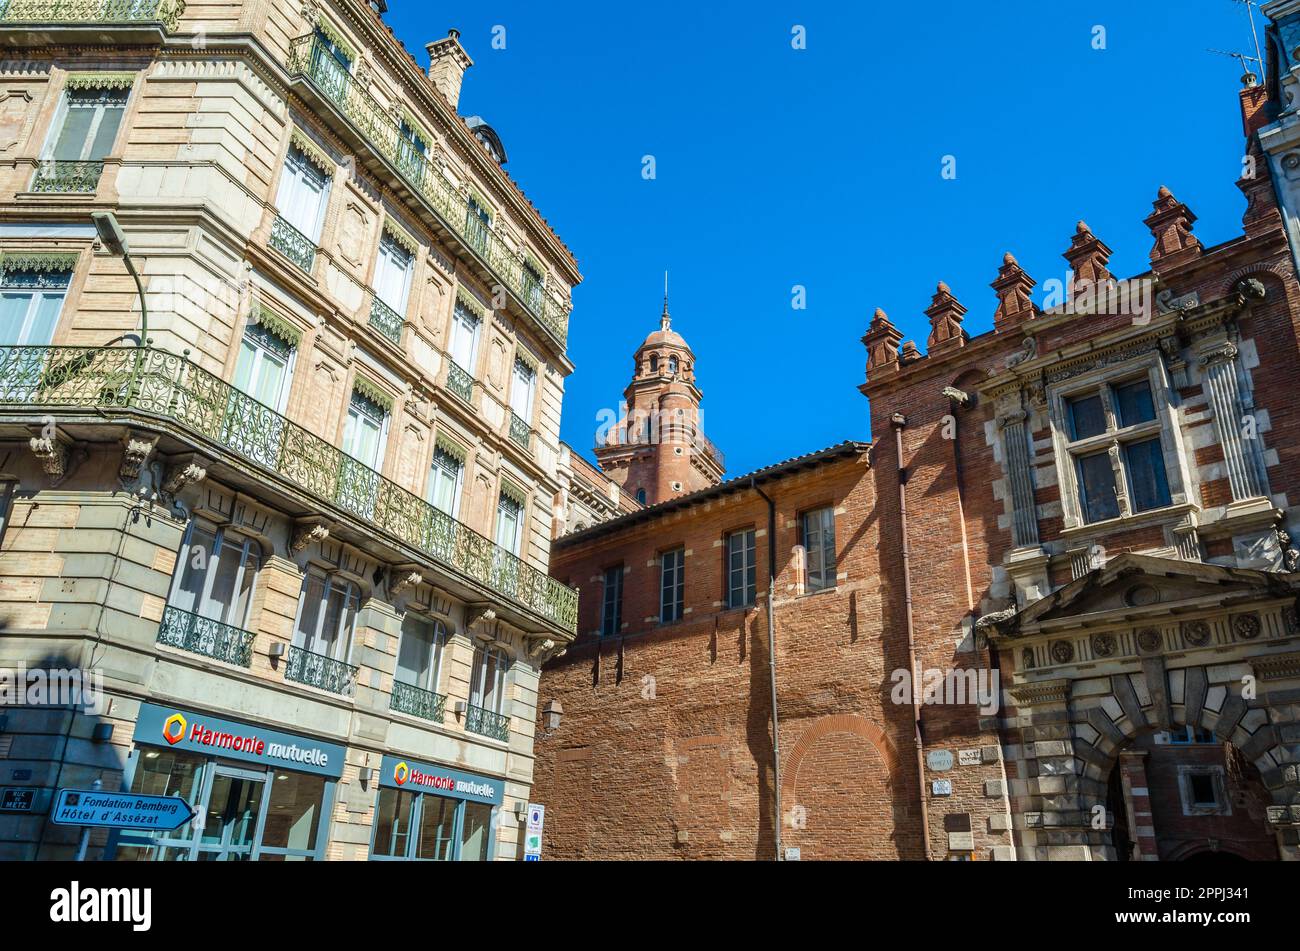 TOULOUSE, FRANCE - SEPTEMBER 5, 2013: Urban scene, view of streets in the old town of Toulouse, Occitanie, southern France Stock Photo